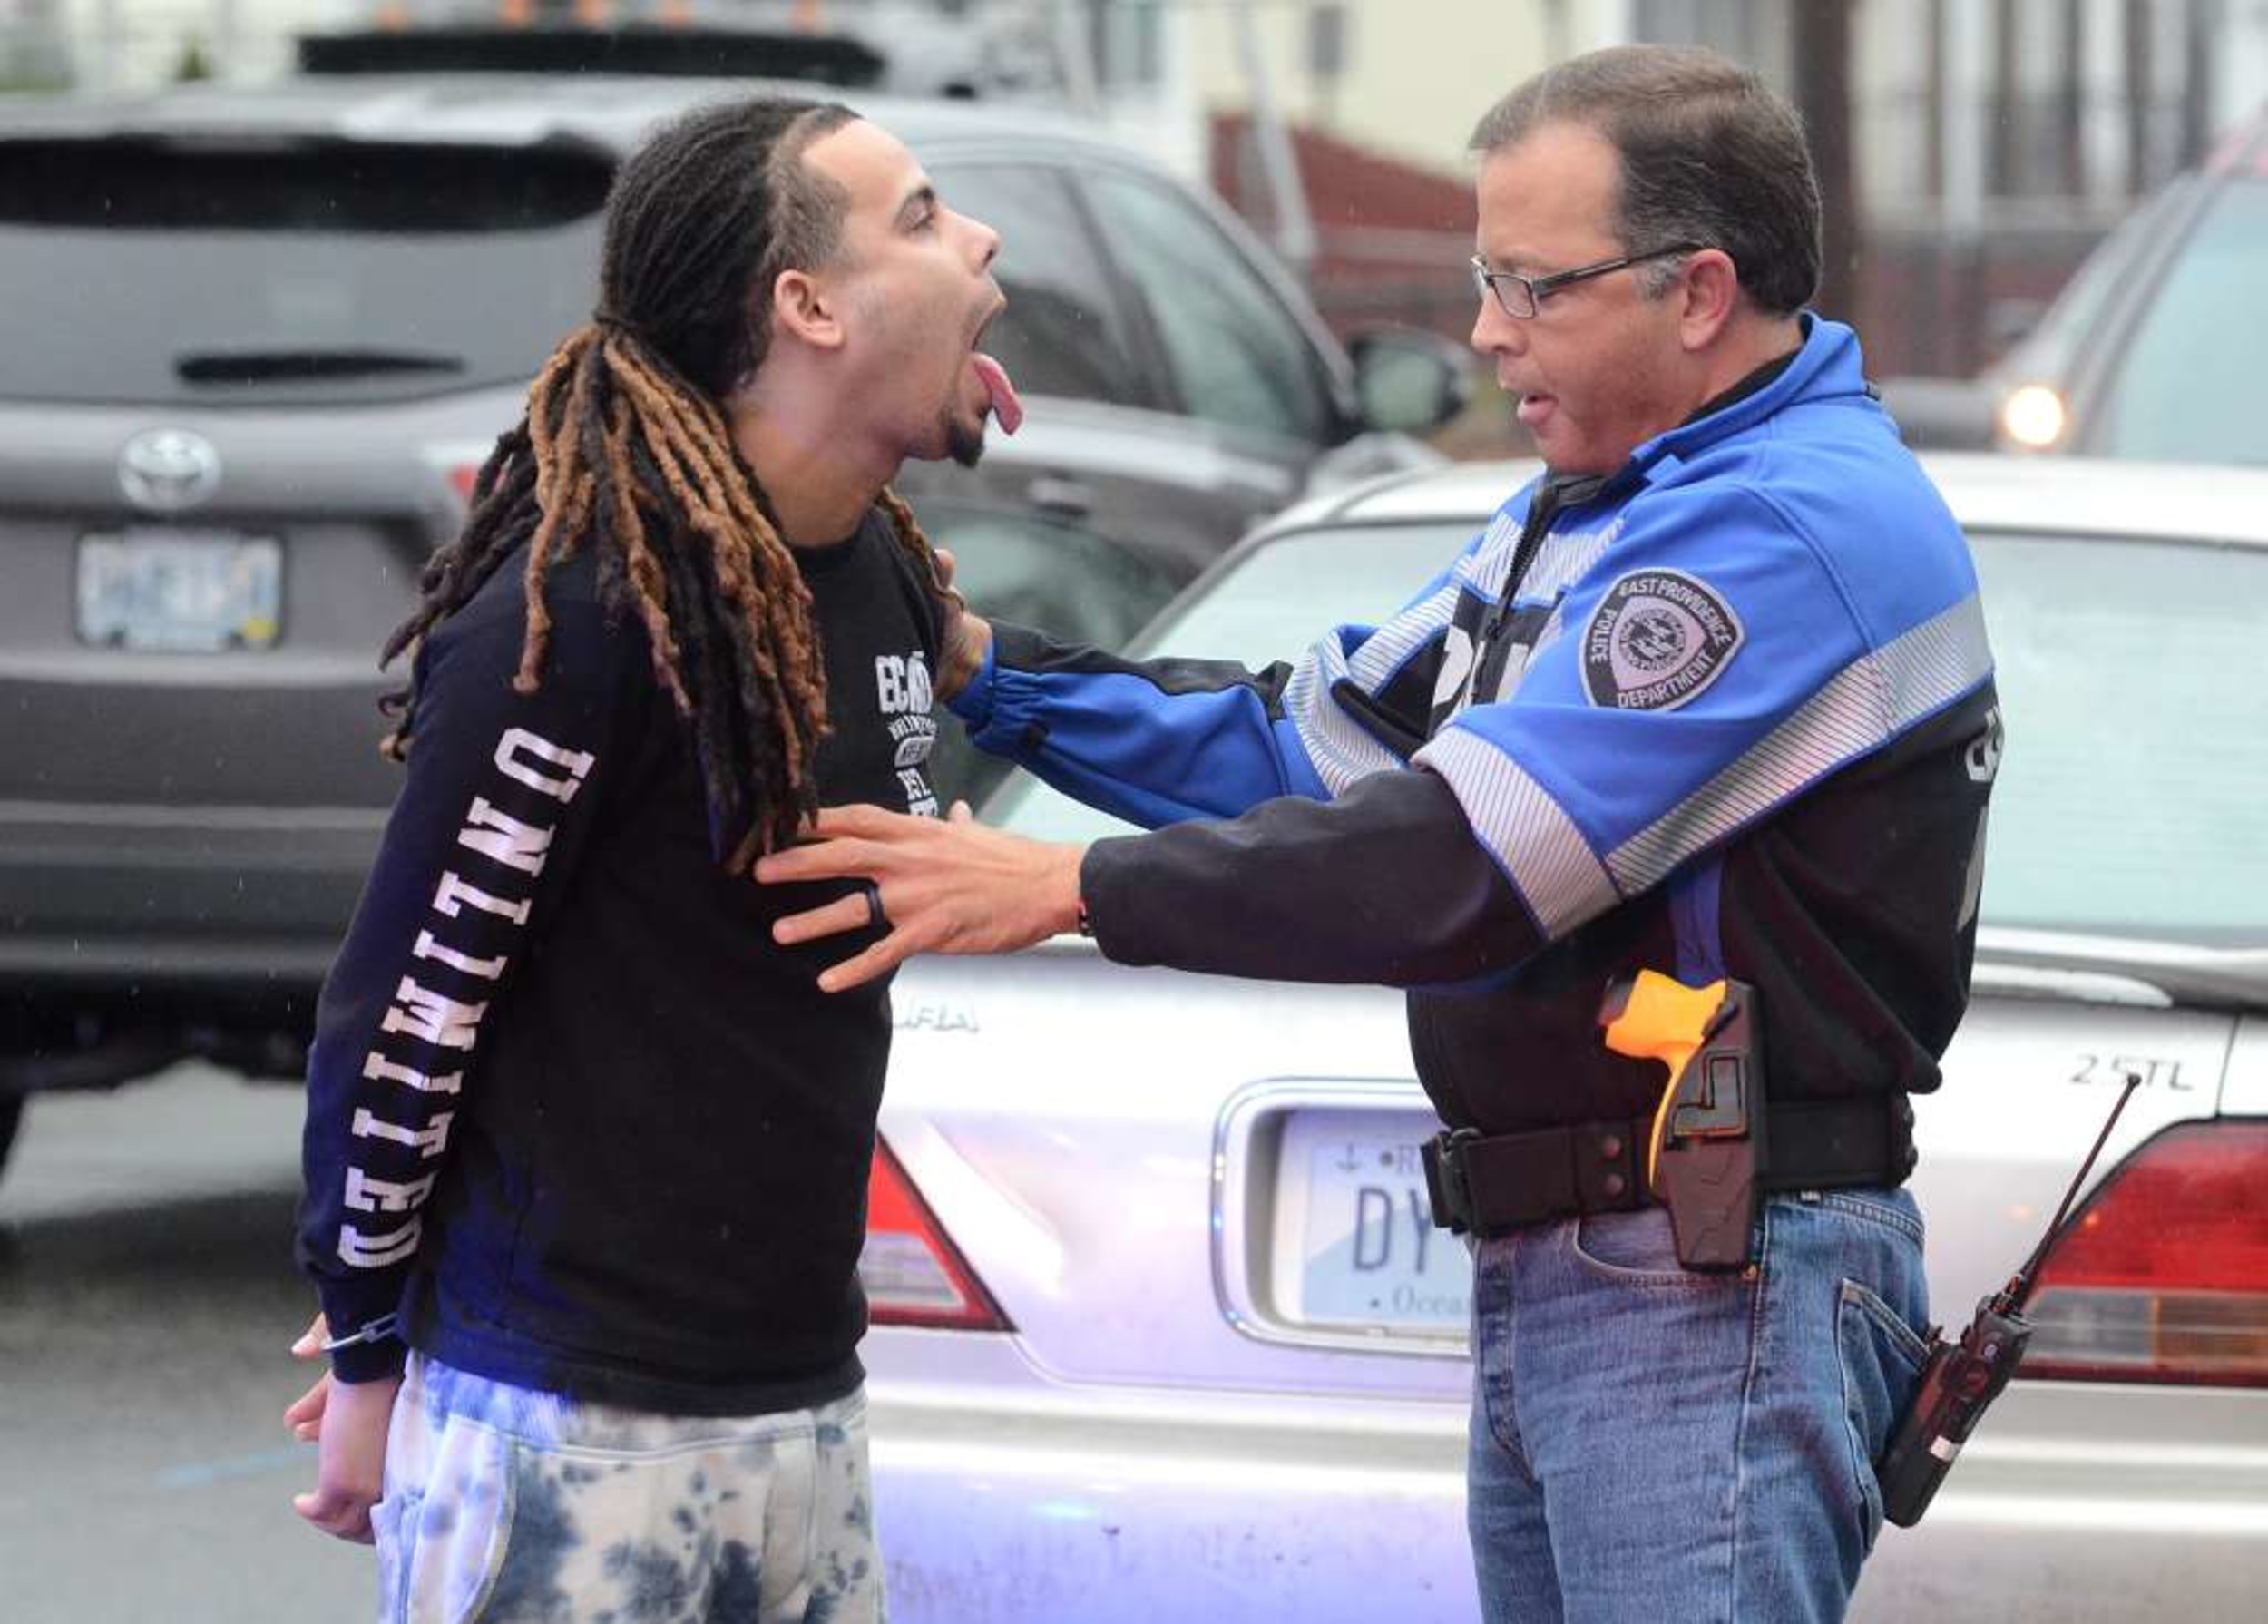 Photo by Rich Dionne
EPPD Vice Sgt. Diogo Mello checks Luis Espinal, 23, (left) for drugs during a heroin bust in December. Espinal was one of several dealers arrested in the department's recent investigation in the sale and purchase of heroin in the city.